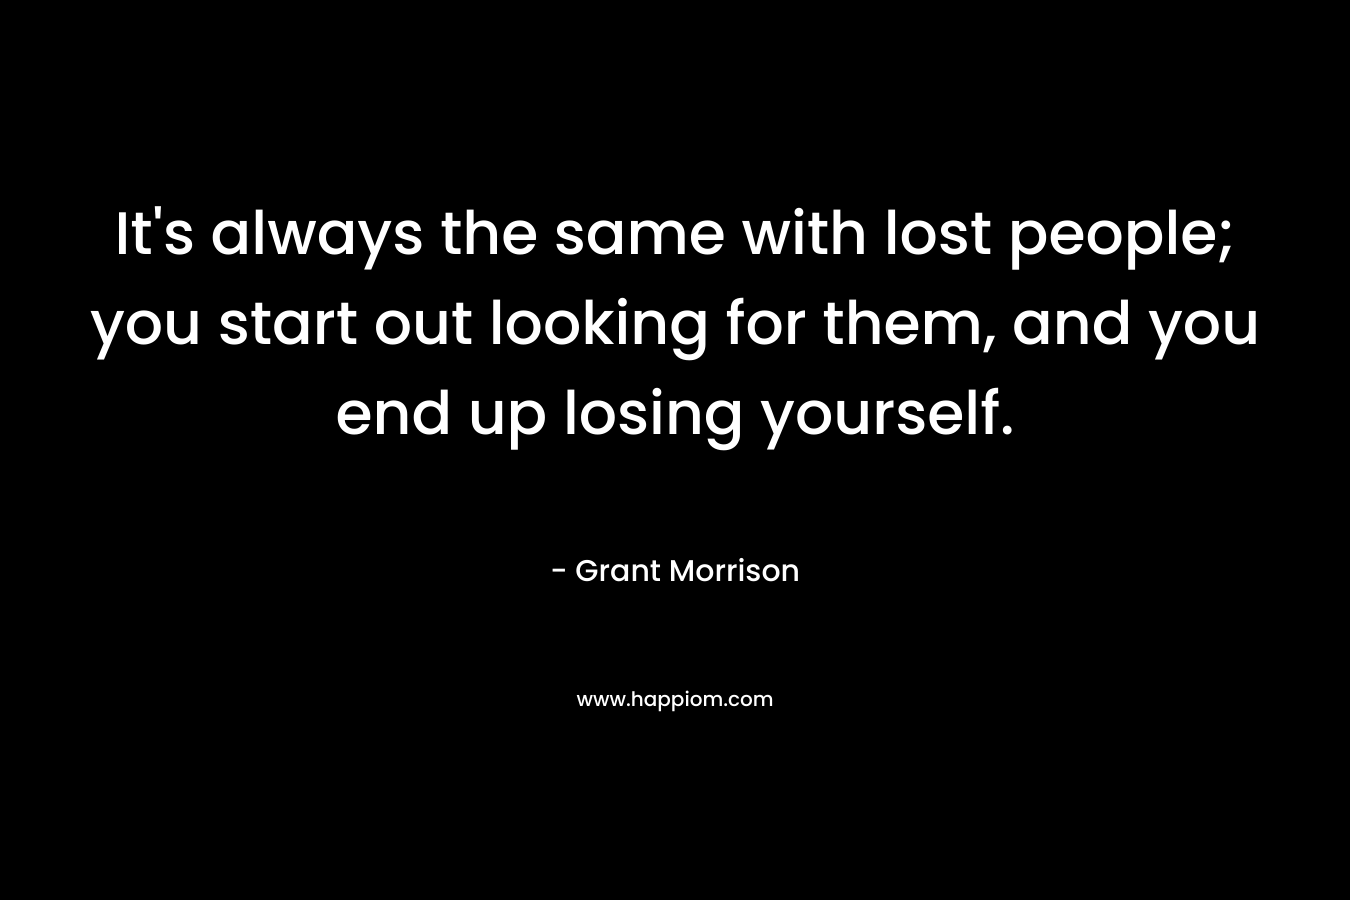 It's always the same with lost people; you start out looking for them, and you end up losing yourself.